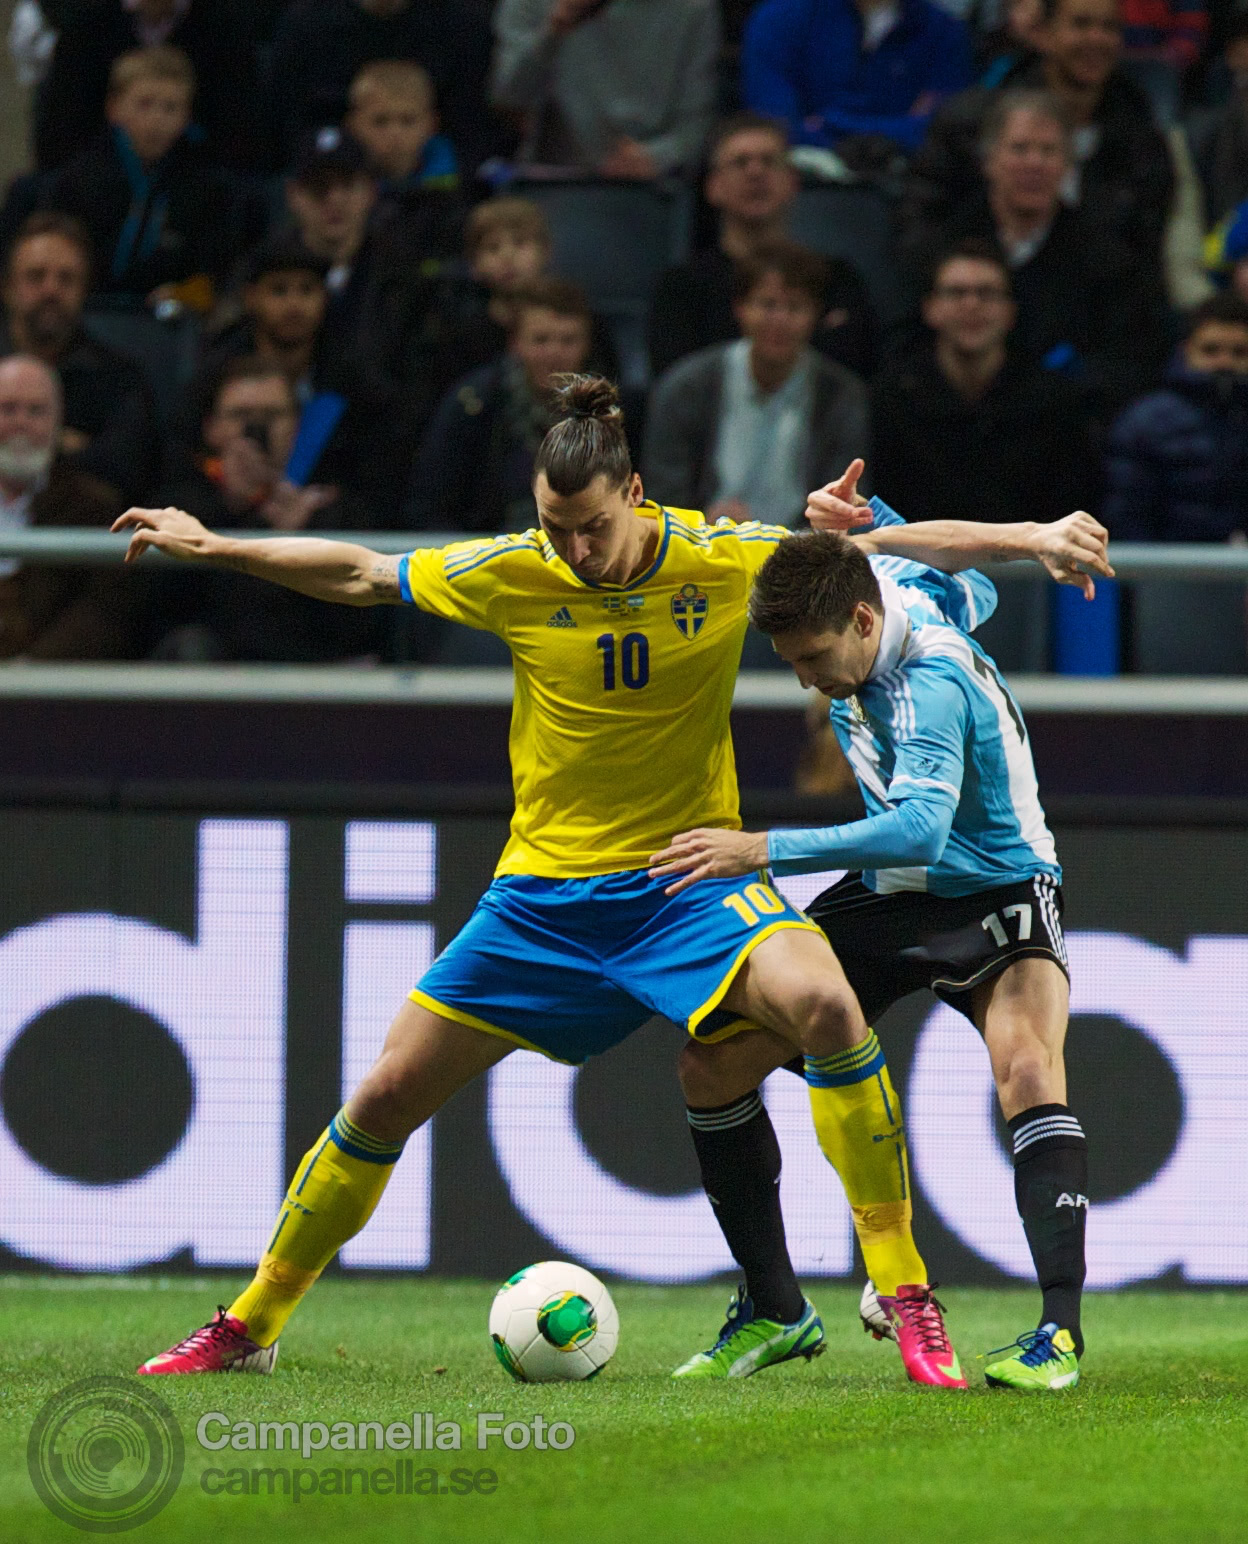 Sweden takes on Argentina - 8 of 35